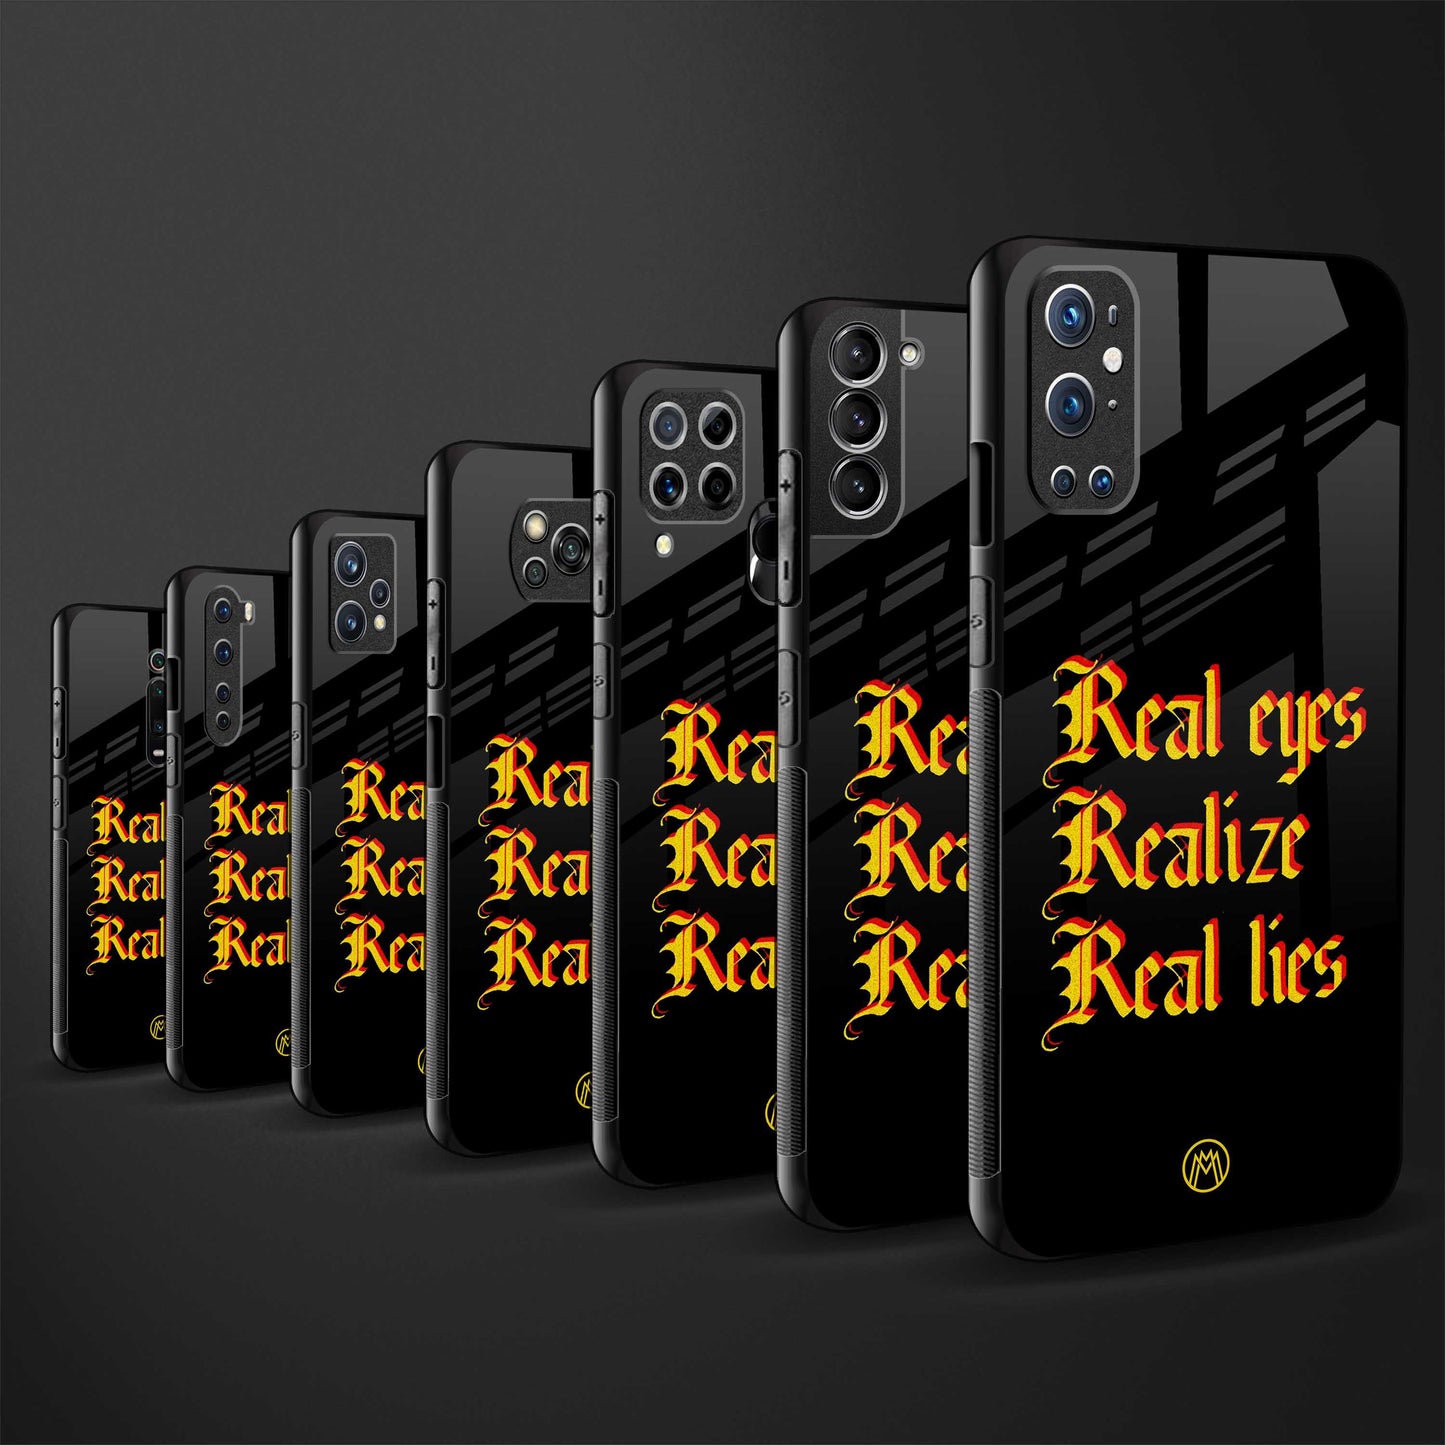 real eyes realize real lies quote glass case for samsung galaxy s21 fe 5g image-3